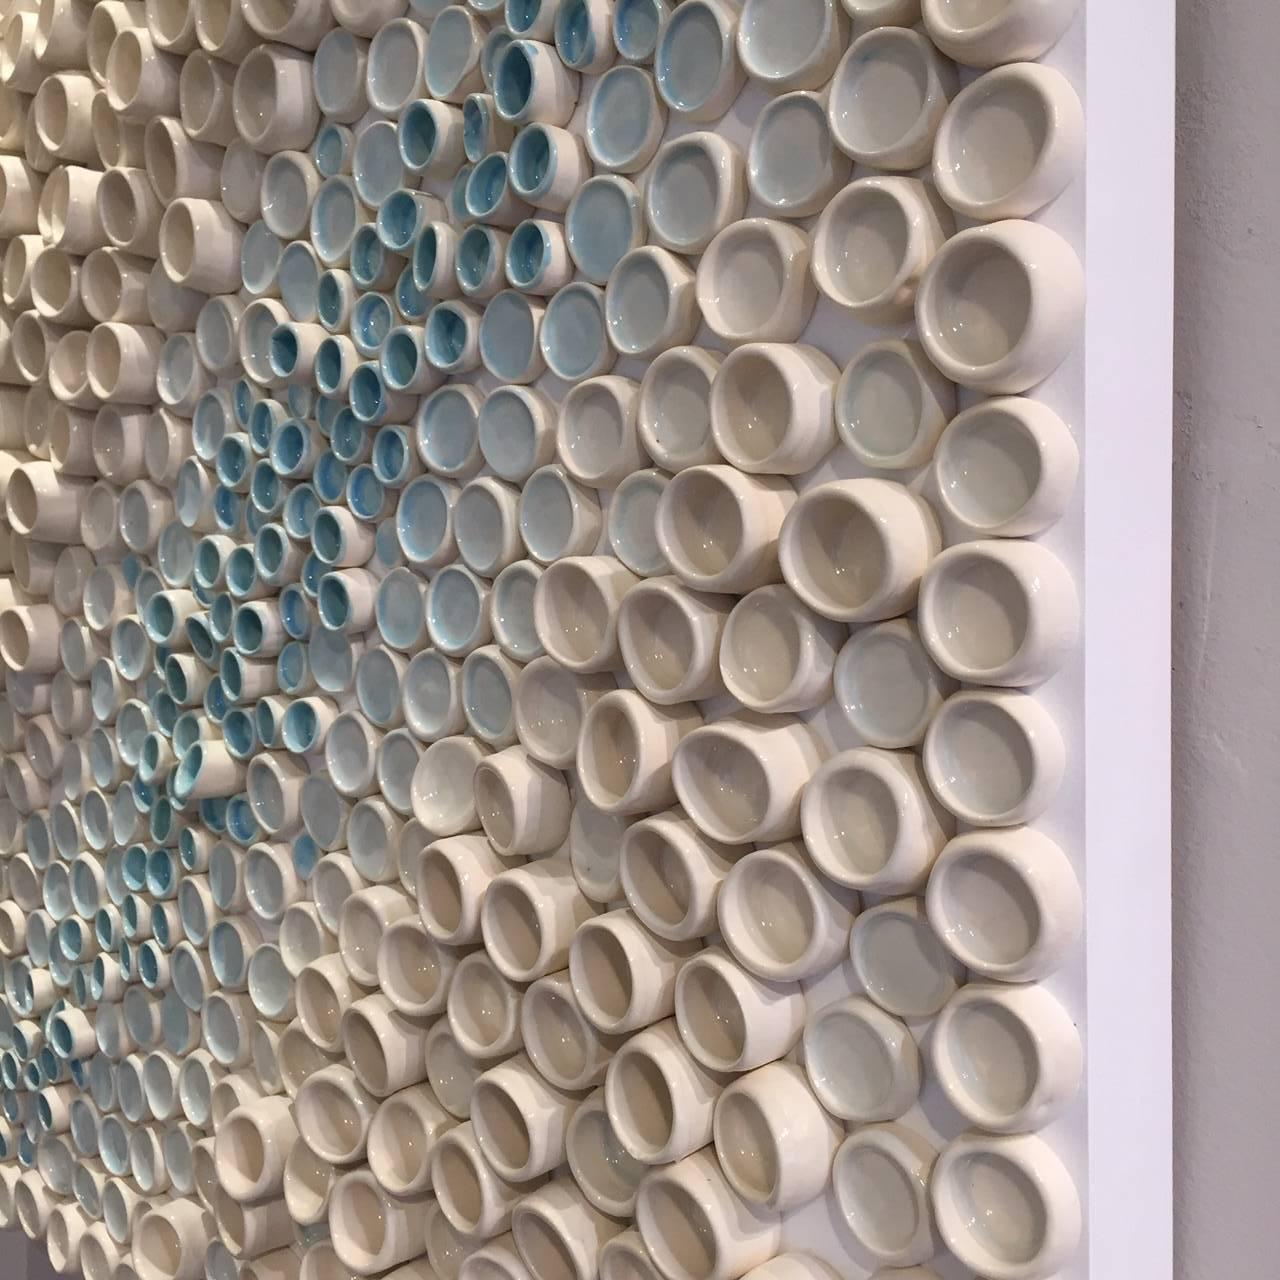 Sea blue green and creamy white low fired glazed ceramic on wood sculptural wall work of art from Pop Art pioneer Jane B. Grimm, whose artistic career began in the 1960’s, when her free-form sculptural jewelry exploded onto the fashion scene in NYC.